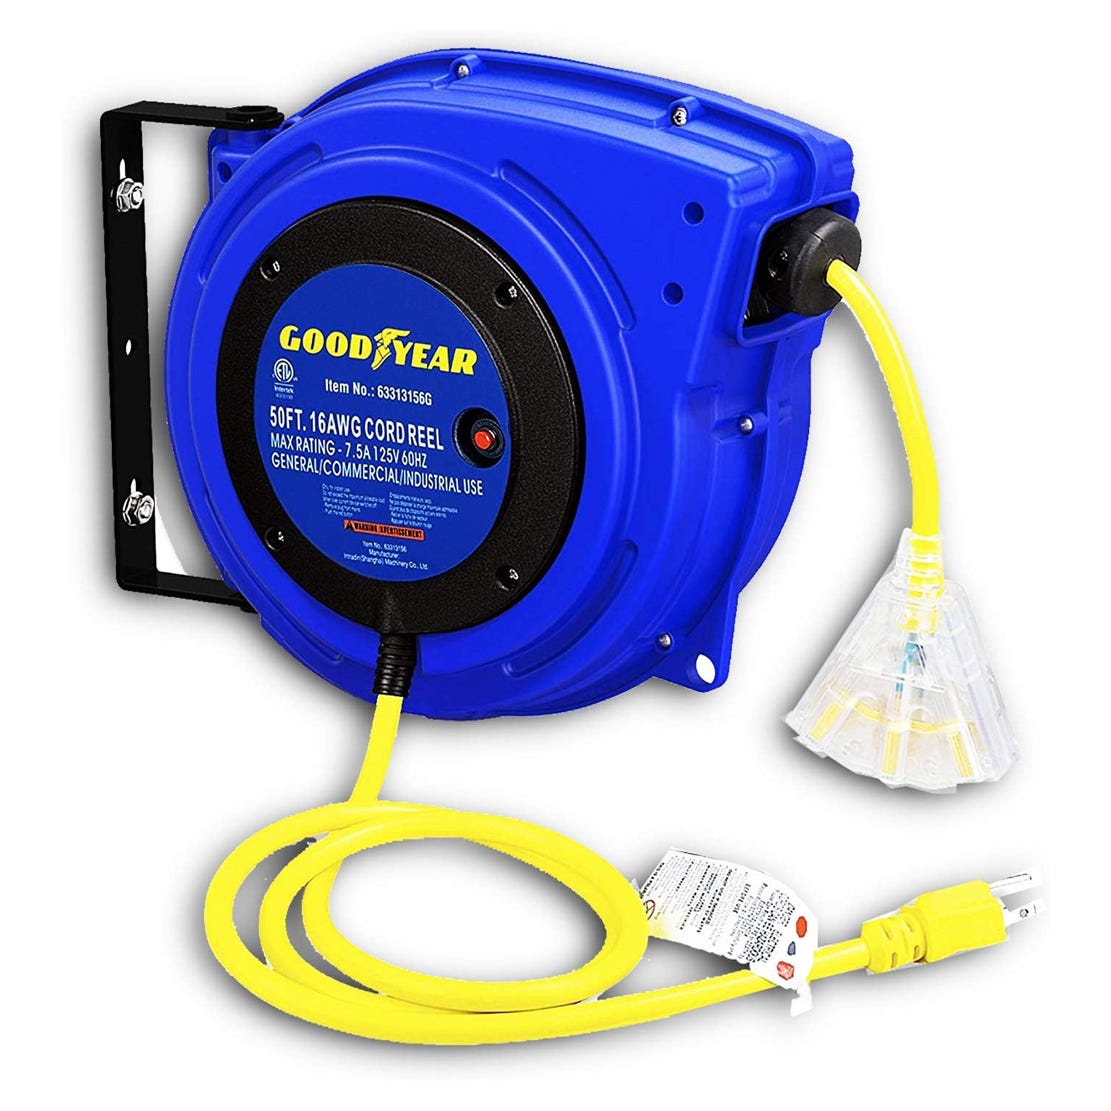 A blue Goodyear extension cord reel with a 50-foot yellow cable and a transparent triple outlet connector.